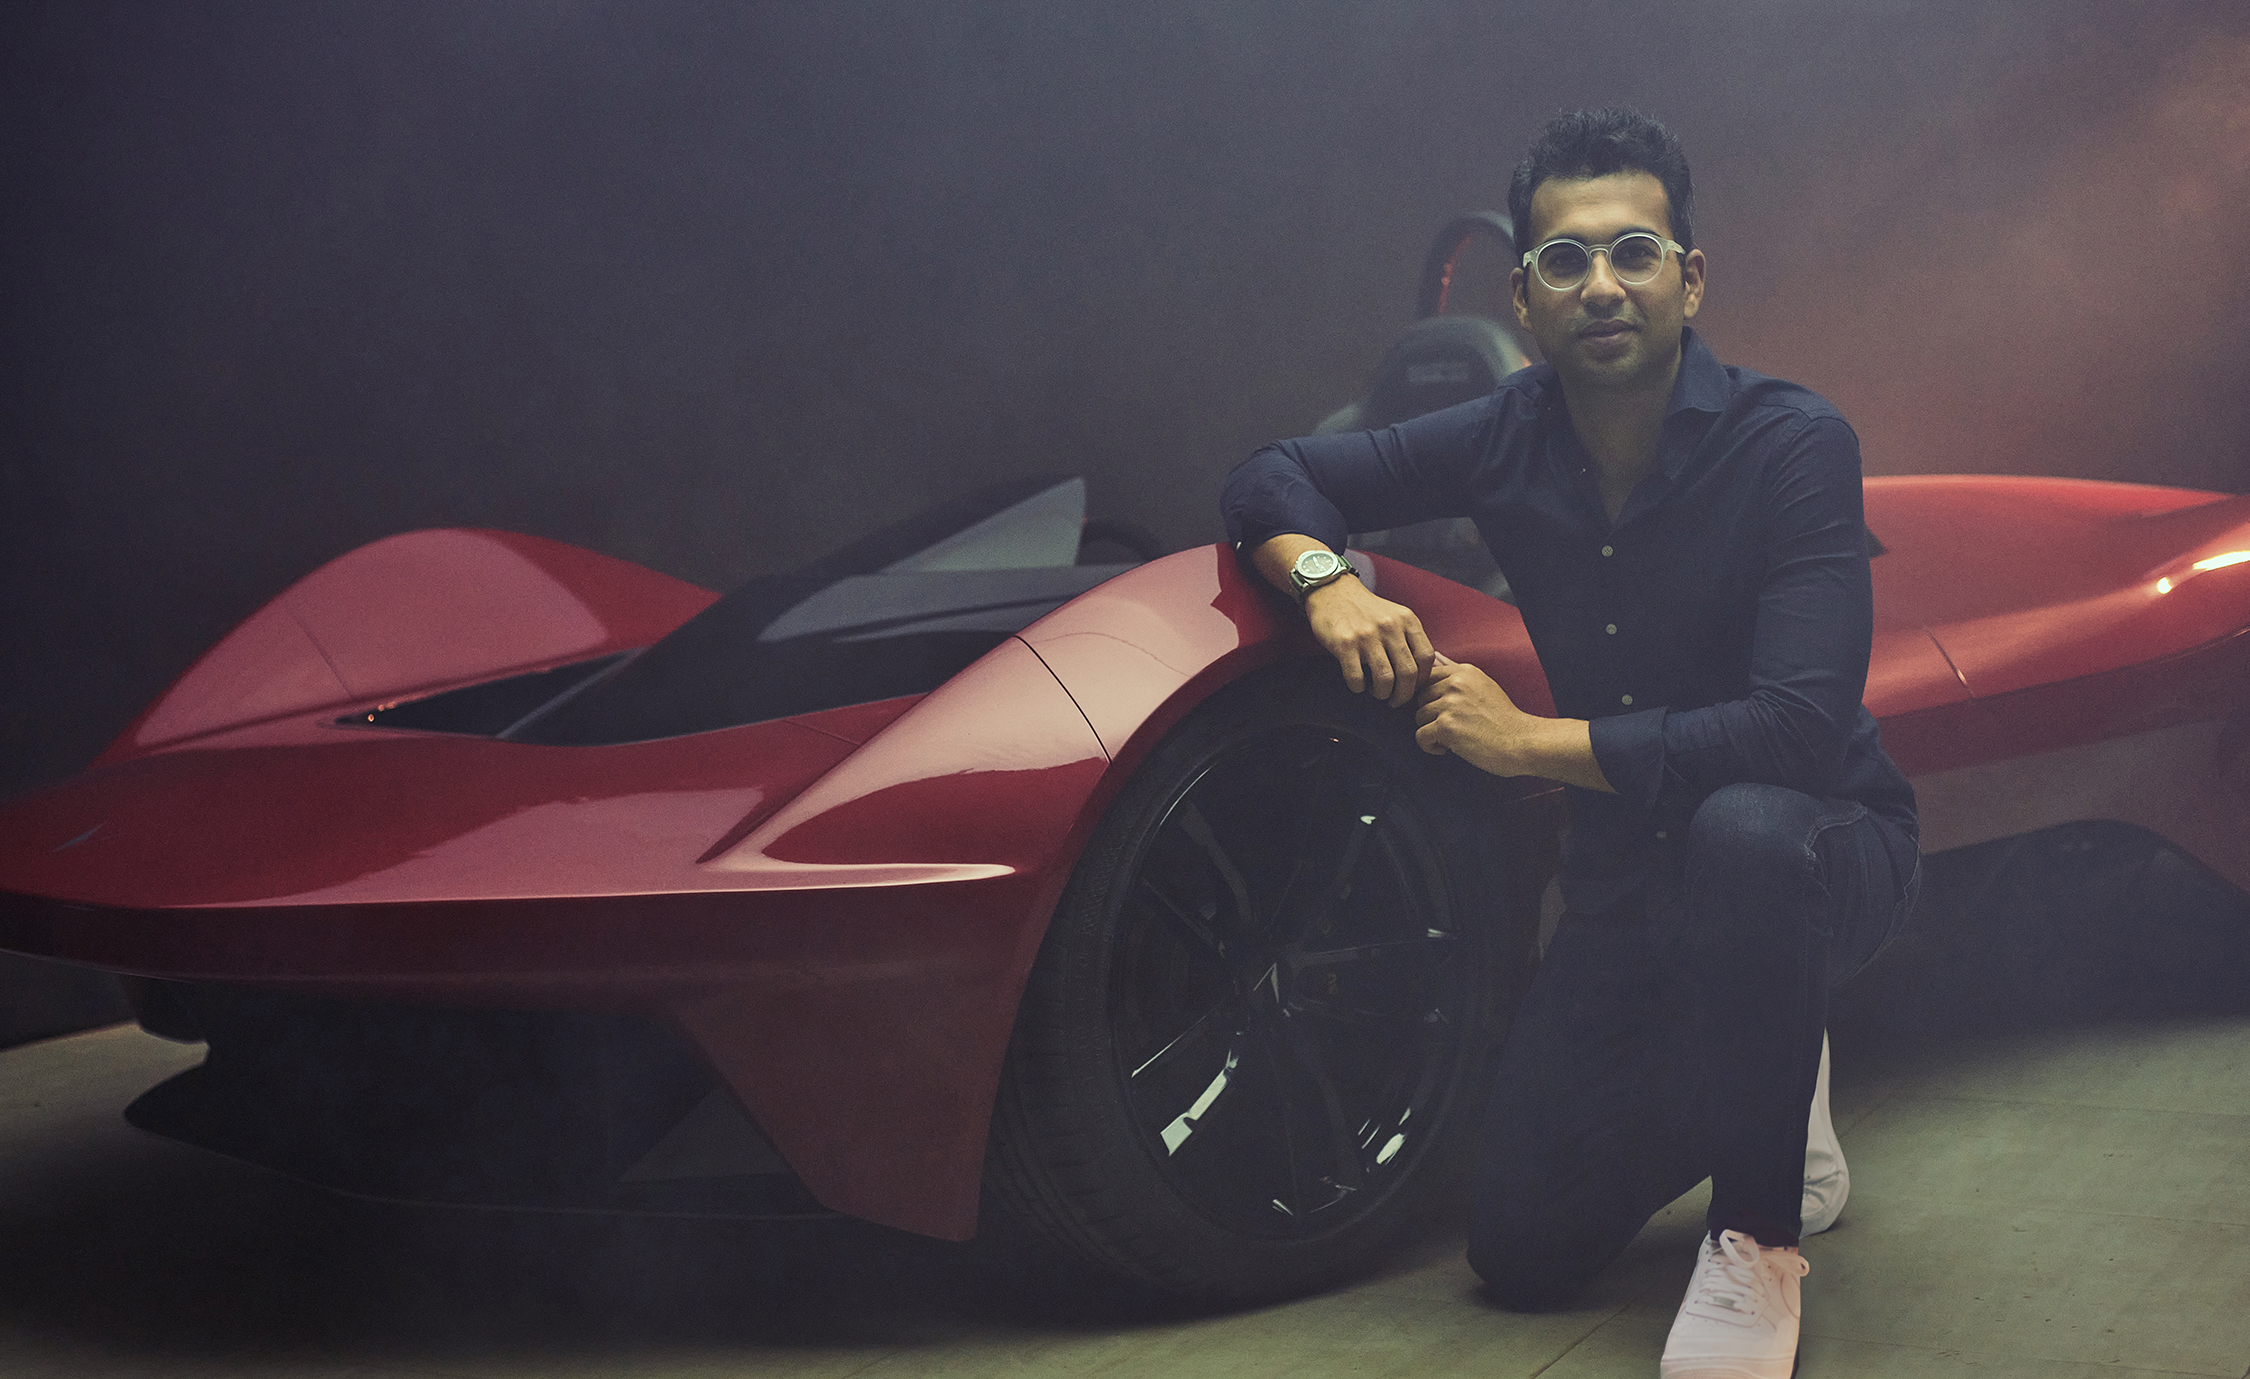 the-world-to-witness-the-launch-of-indias-fastest-car-ever-the-lightest-electric-hypercar-ekonk